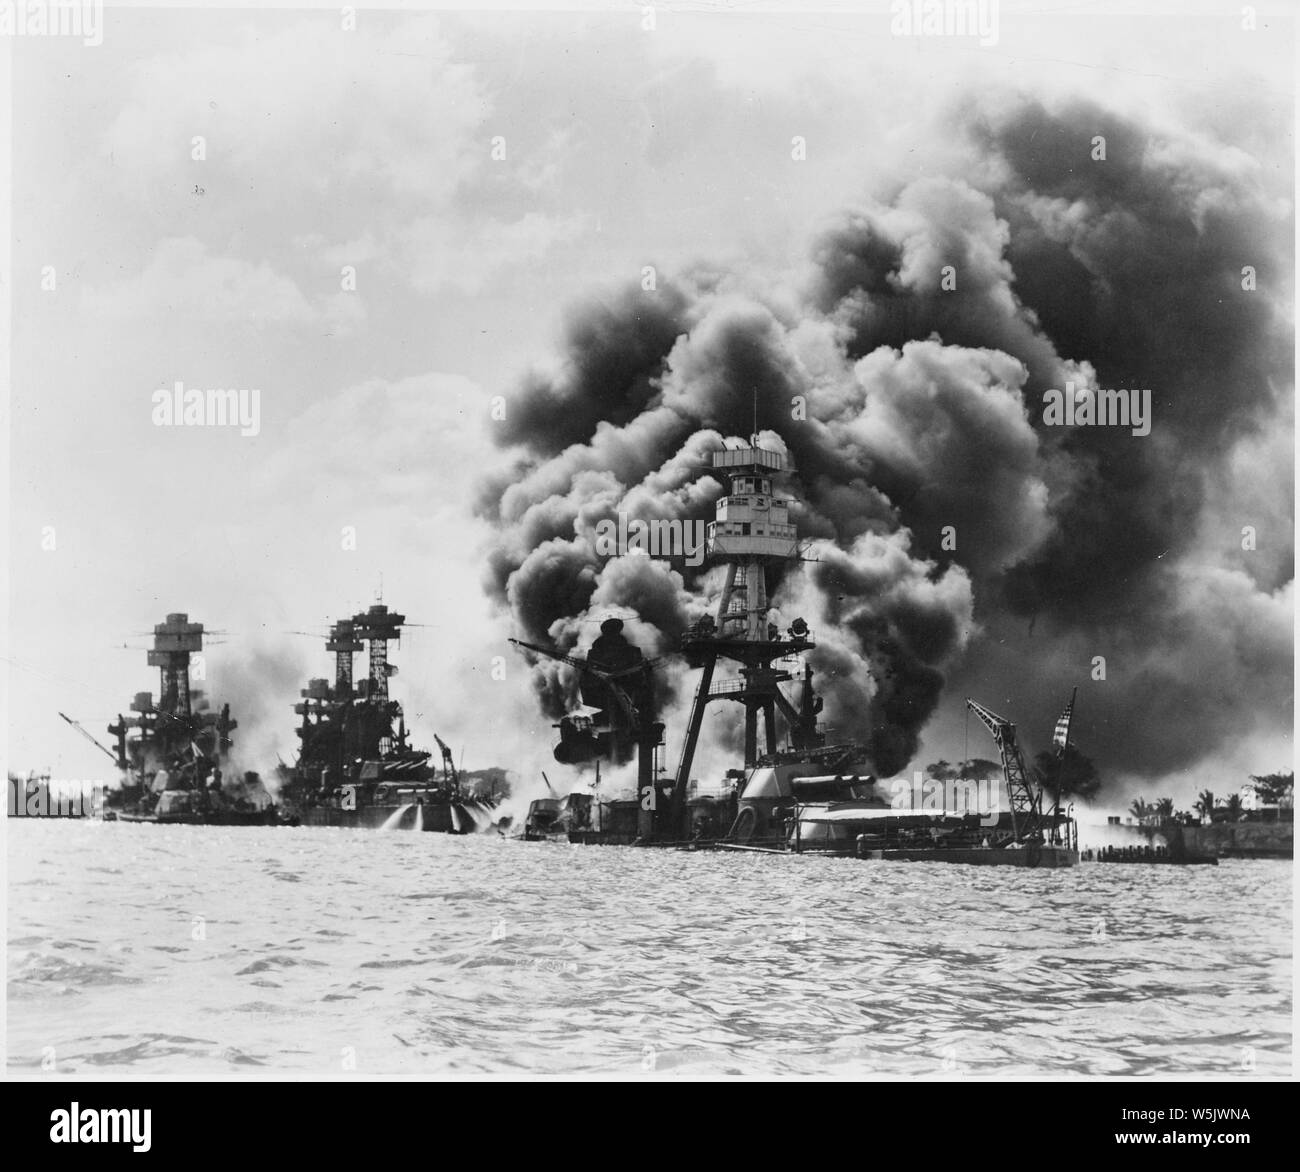 Aftermath of a Japanese sneak attack on these three stricken U.S. battleships; from left to right: USS West Virginia (severely damaged), USS Tennessee (damaged), and the USS Arizona (sunk) Stock Photo